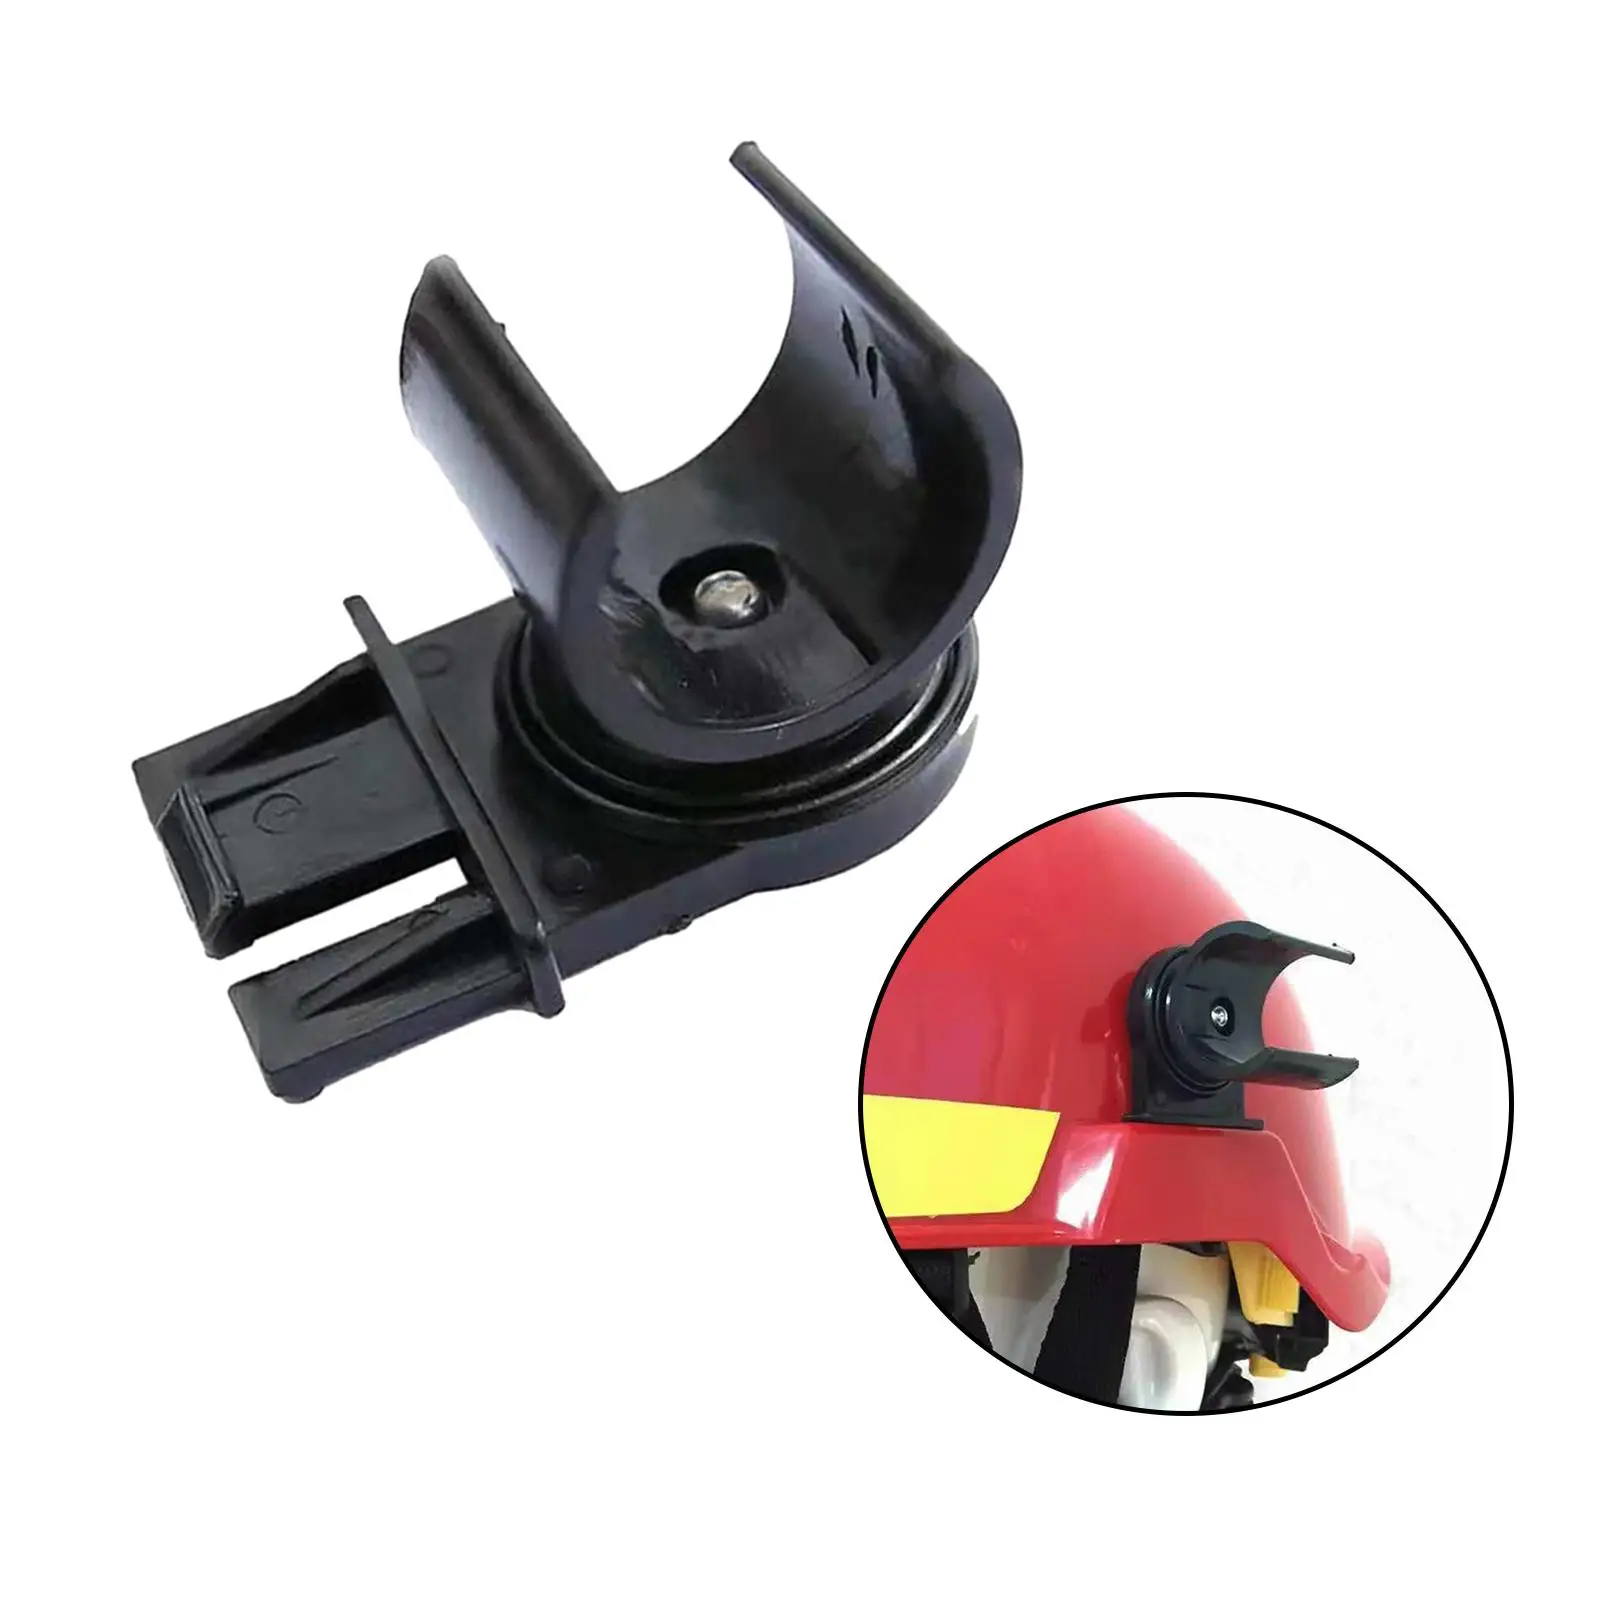 Hardhat Flashlight Holder Mount Bracket Portable Bracket Torch Mount Clamp for Outdoor Cycling Construction Workers Outdoor Work